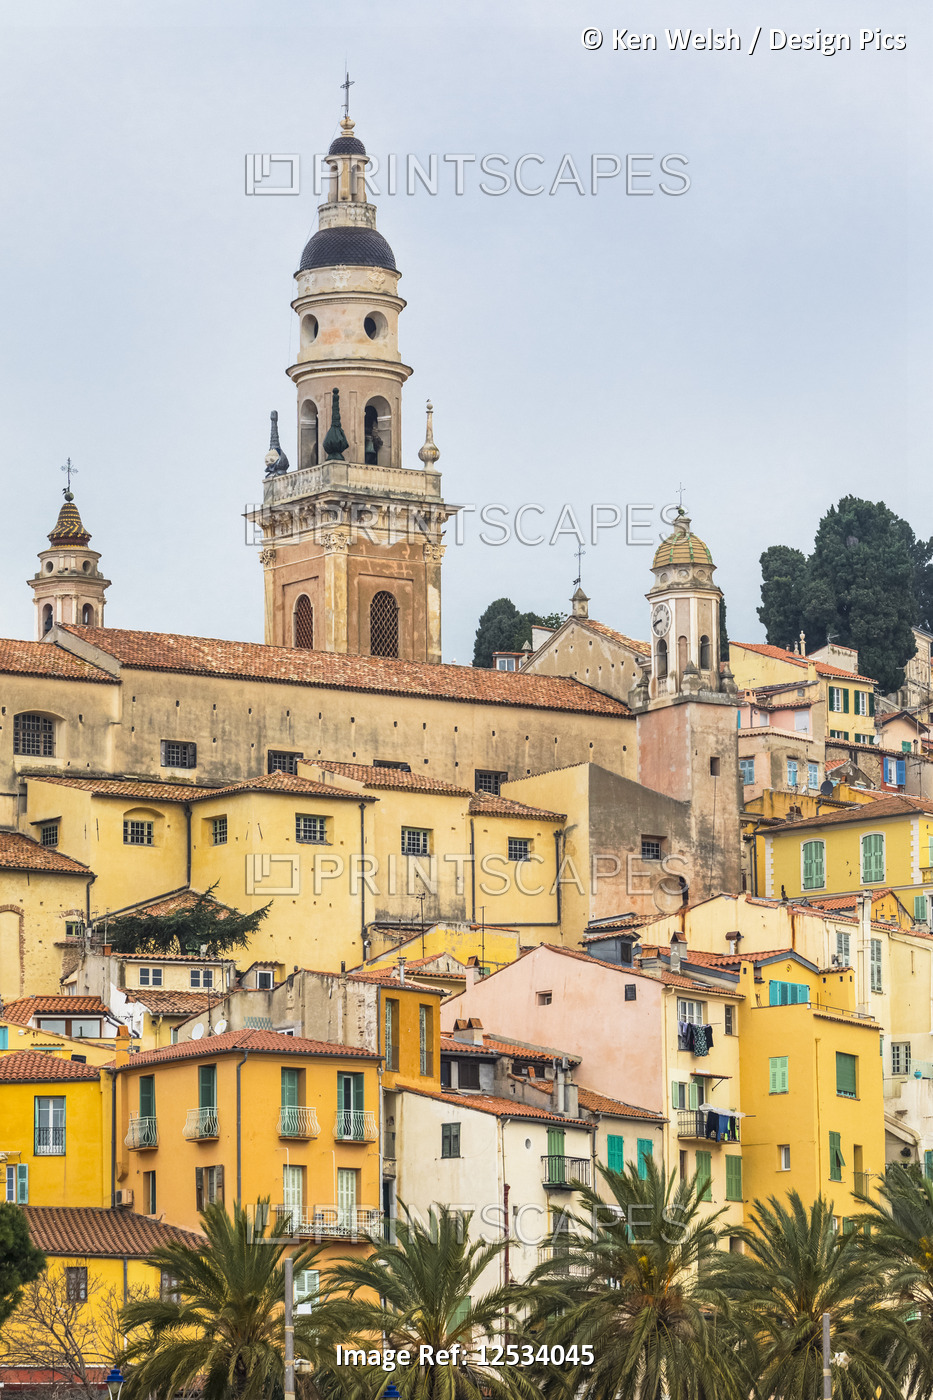 Pastel coloured houses in the old town, typical of towns on the French Riviera. ...